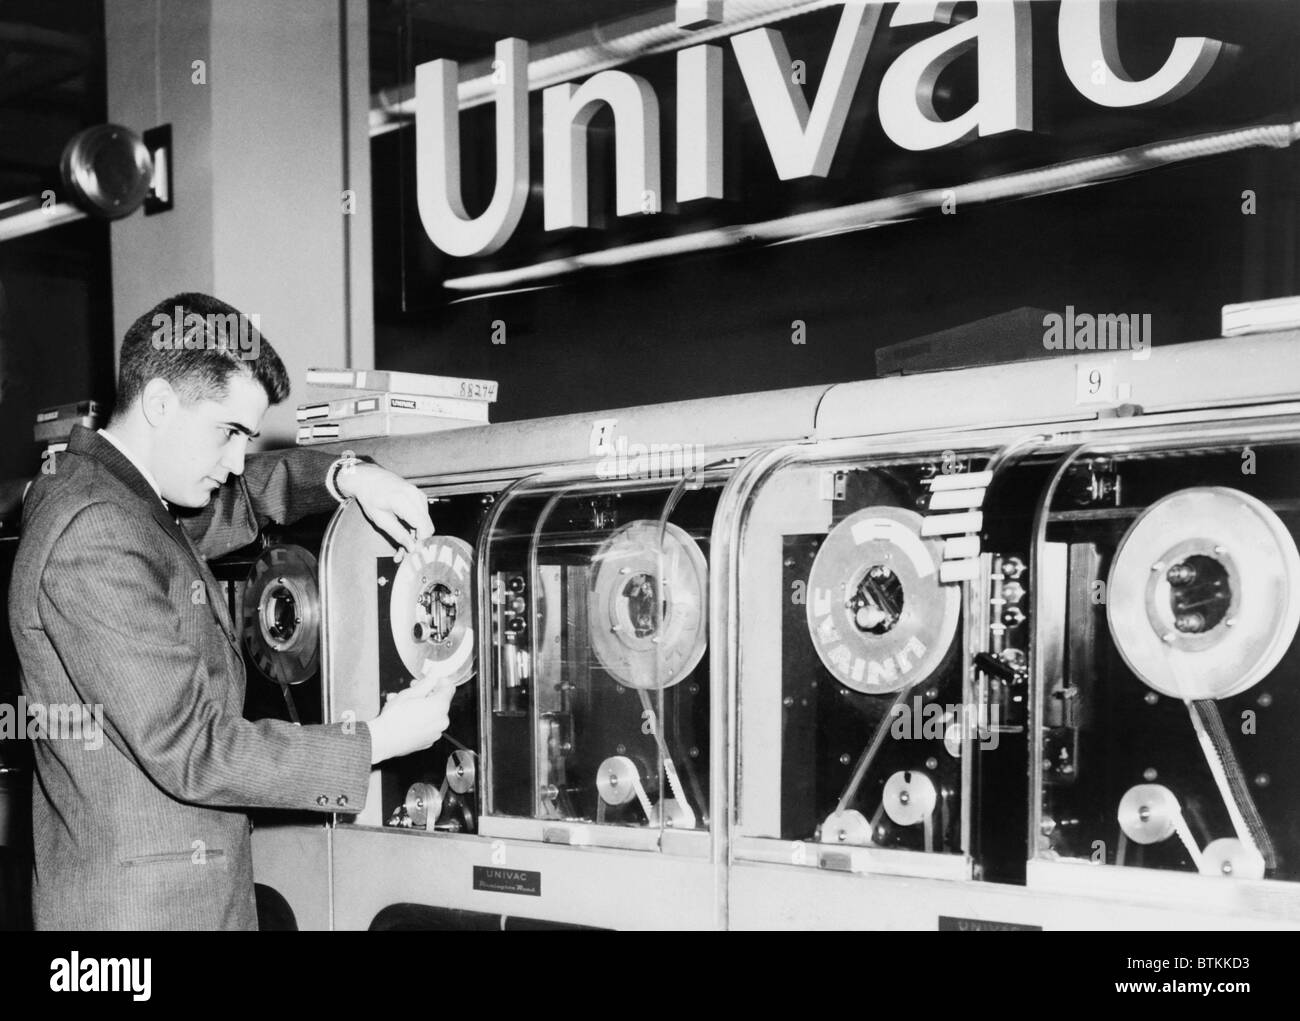 Univac was the first computer designed for commercial use and 46 were built and installed in the 1950s. Designed by J. Presper Eckert and John Mauchly and the name UNIVAC was shortened from Universal Automatic Computer. 1959 photo. Stock Photo